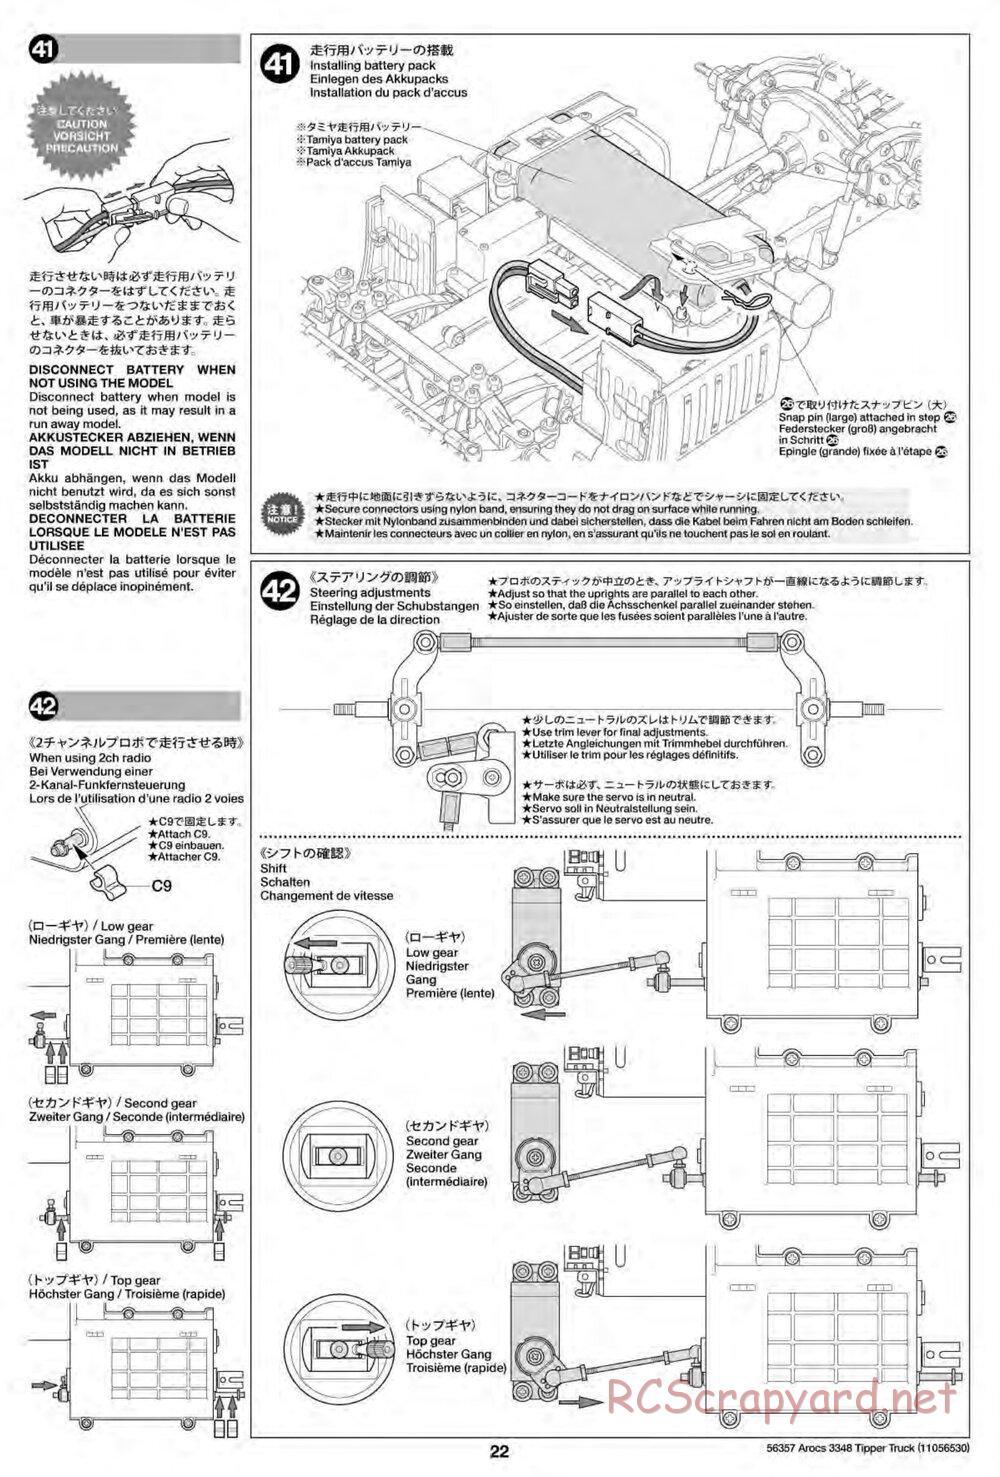 Tamiya - Mercedes-Benz Arocs 3348 6x4 Tipper Truck Chassis - Manual - Page 22